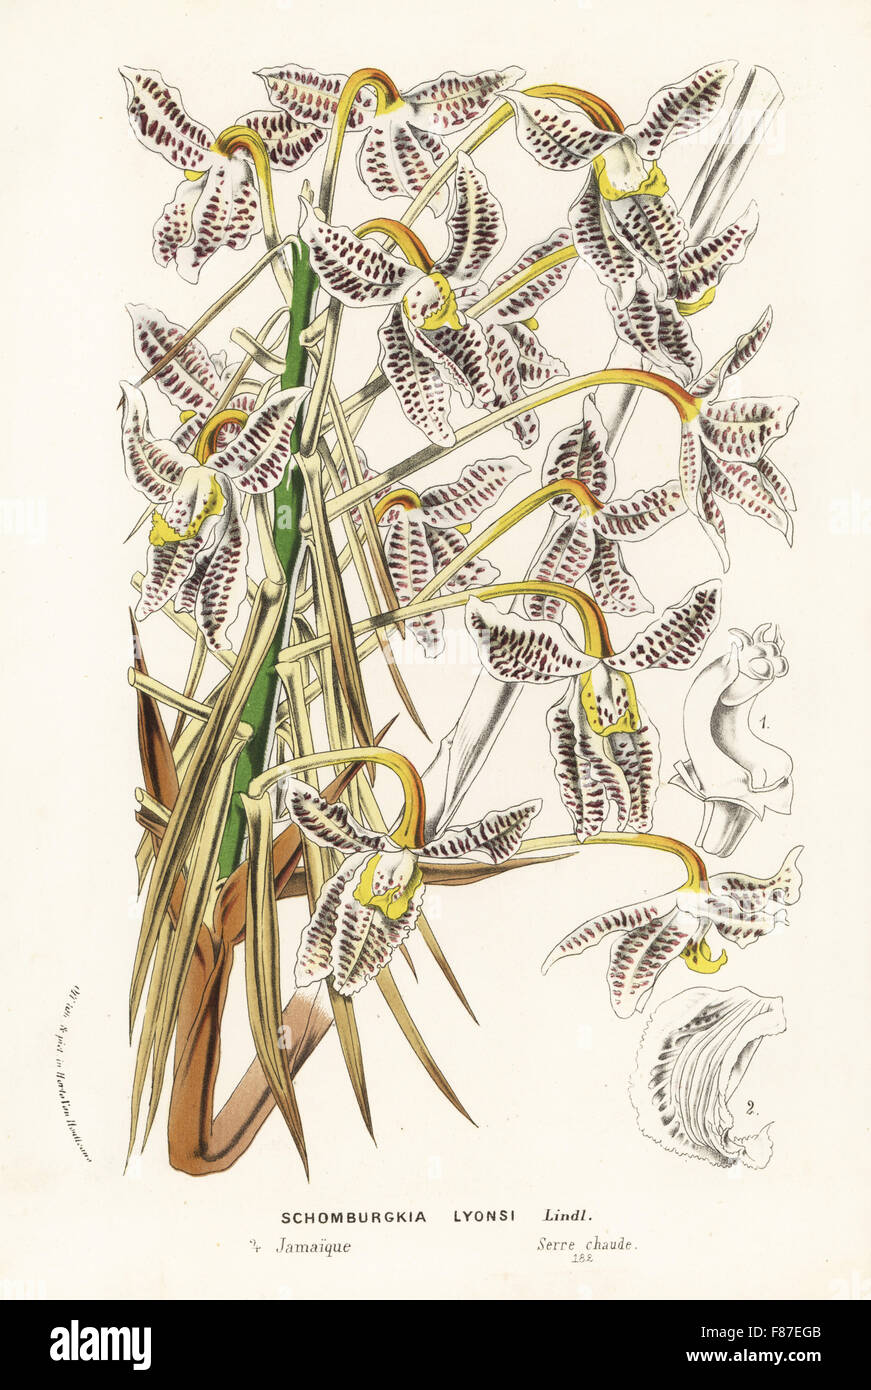 Laelia lyonsii orchid (Schomburgkia lyonsi). Handcoloured lithograph from Louis van Houtte and Charles Lemaire's Flowers of the Gardens and Hothouses of Europe, Flore des Serres et des Jardins de l'Europe, Ghent, Belgium, 1874. Stock Photo